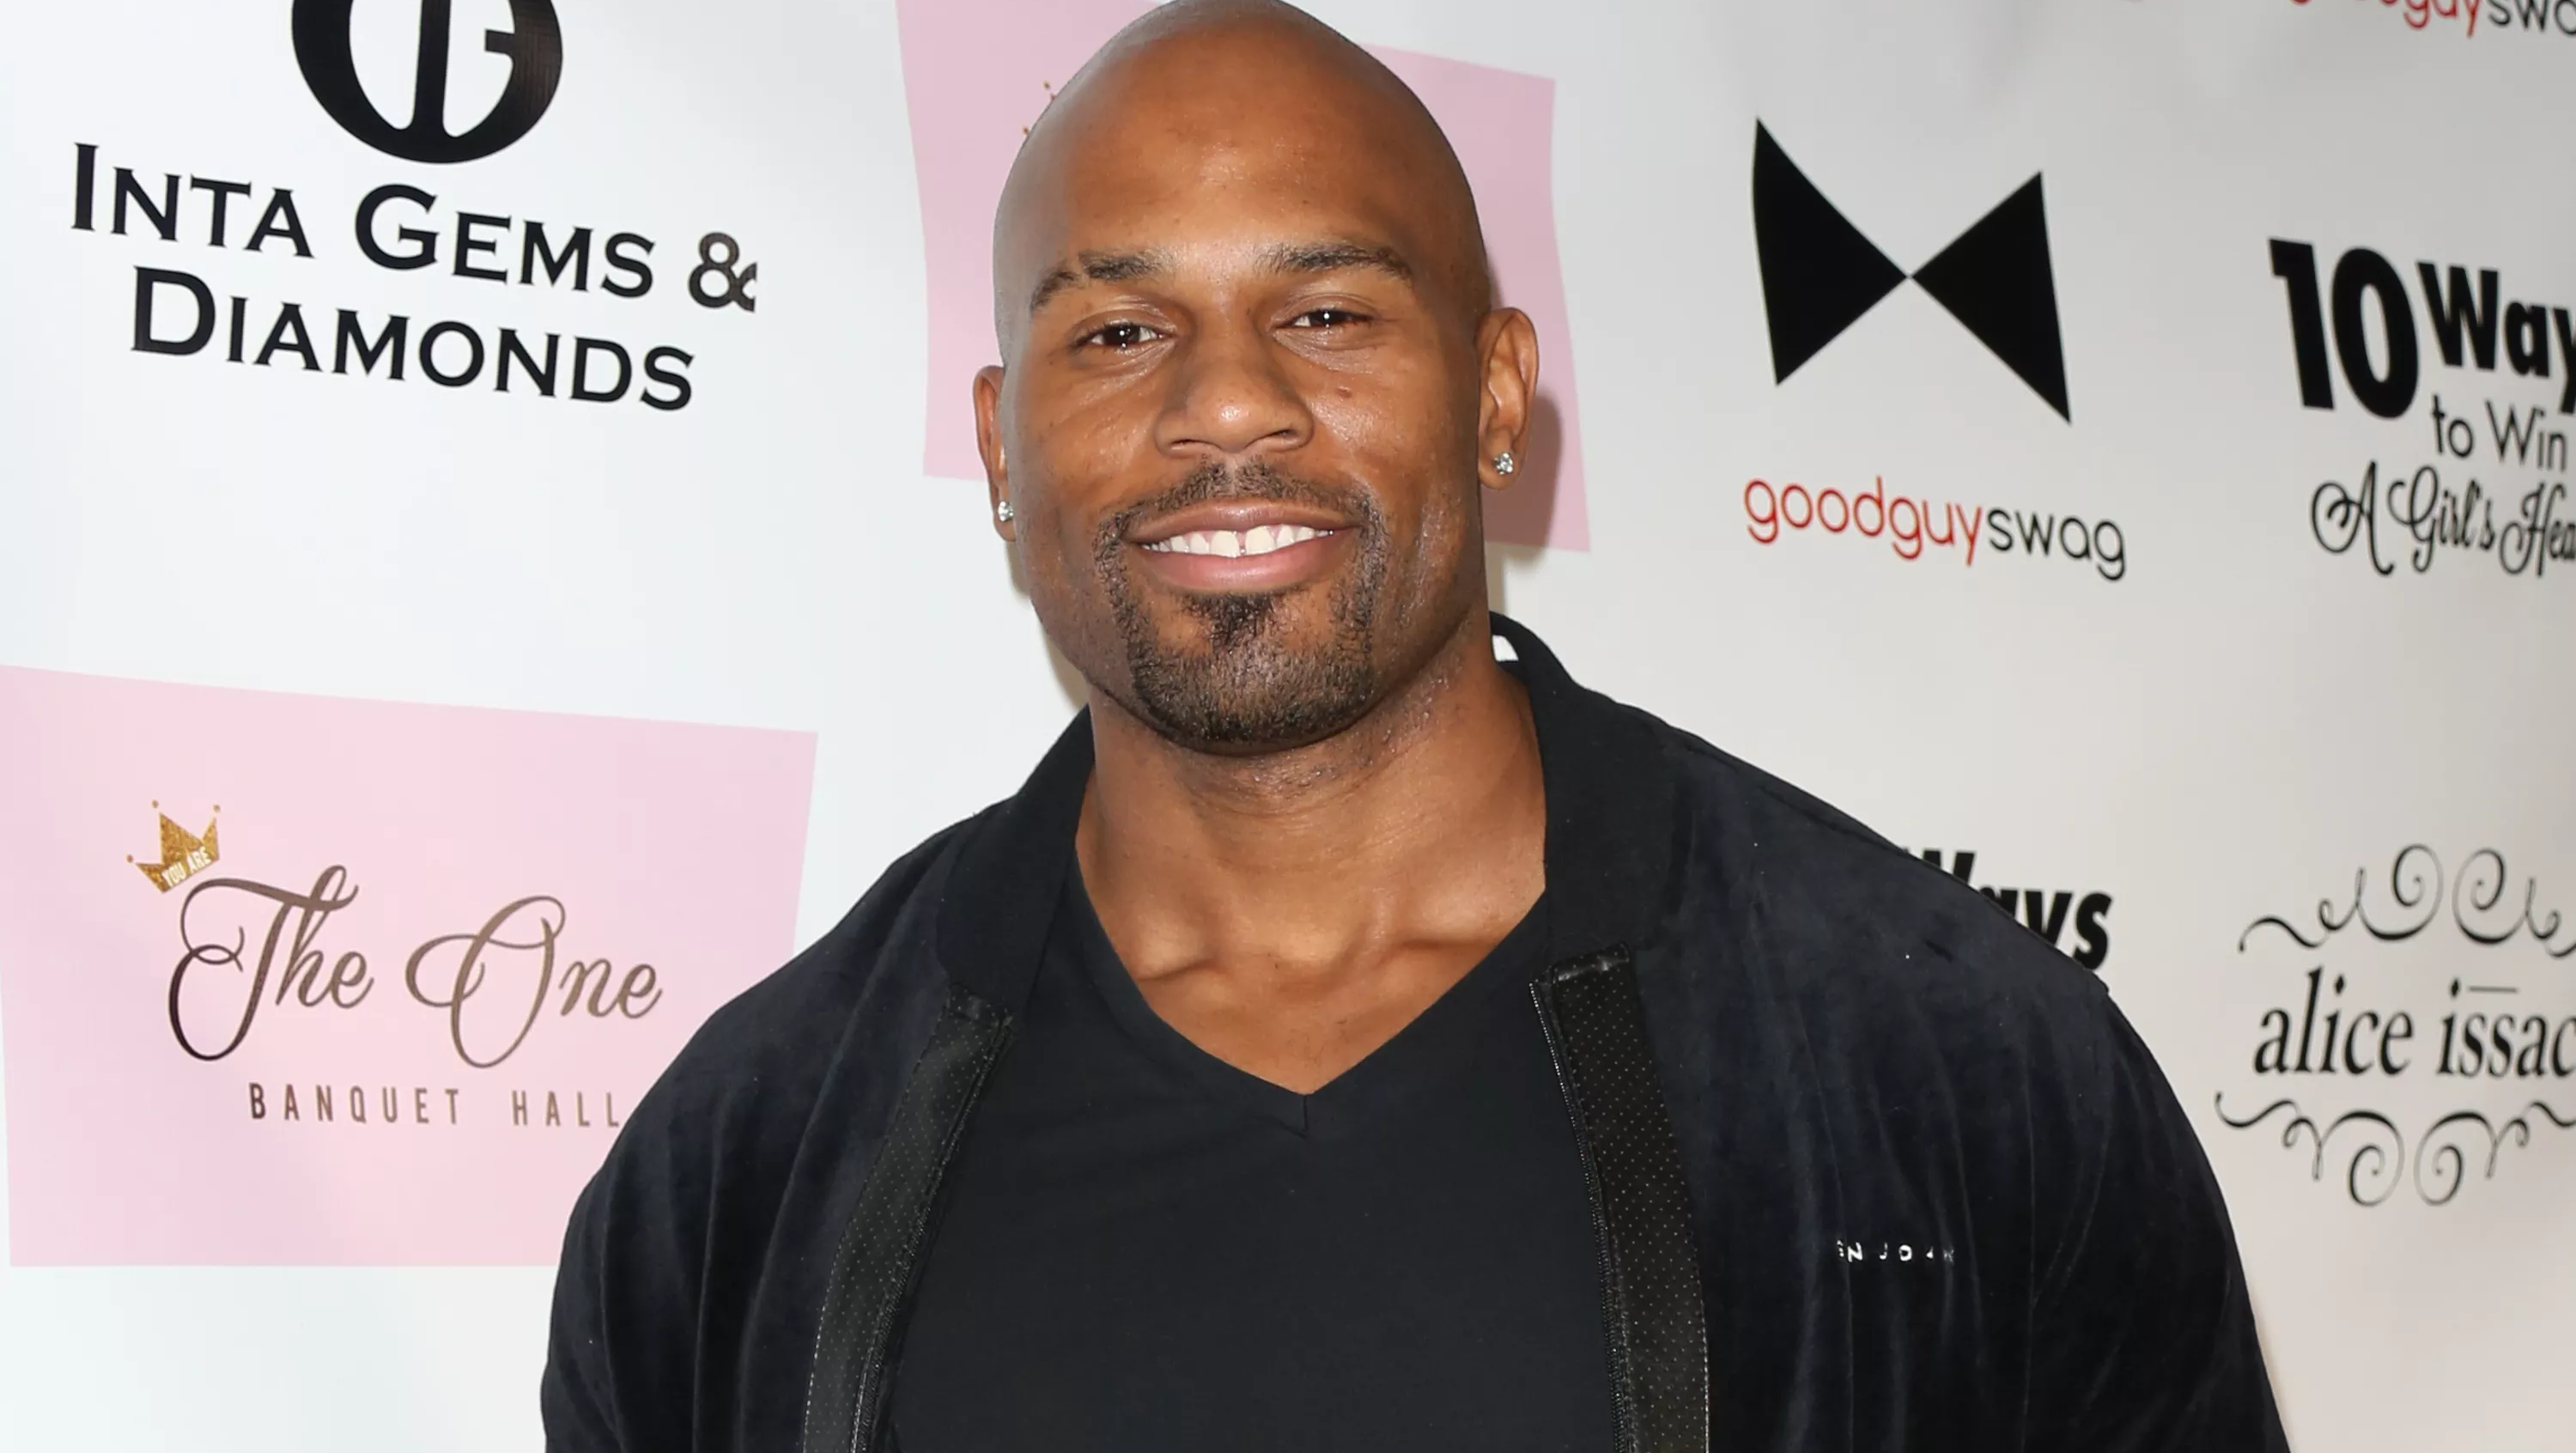 WWE Star Shad Gaspard’s Autopsy Report Confirms He Heroically ‘Gave His Son’ To Lifeguards Before Drowning